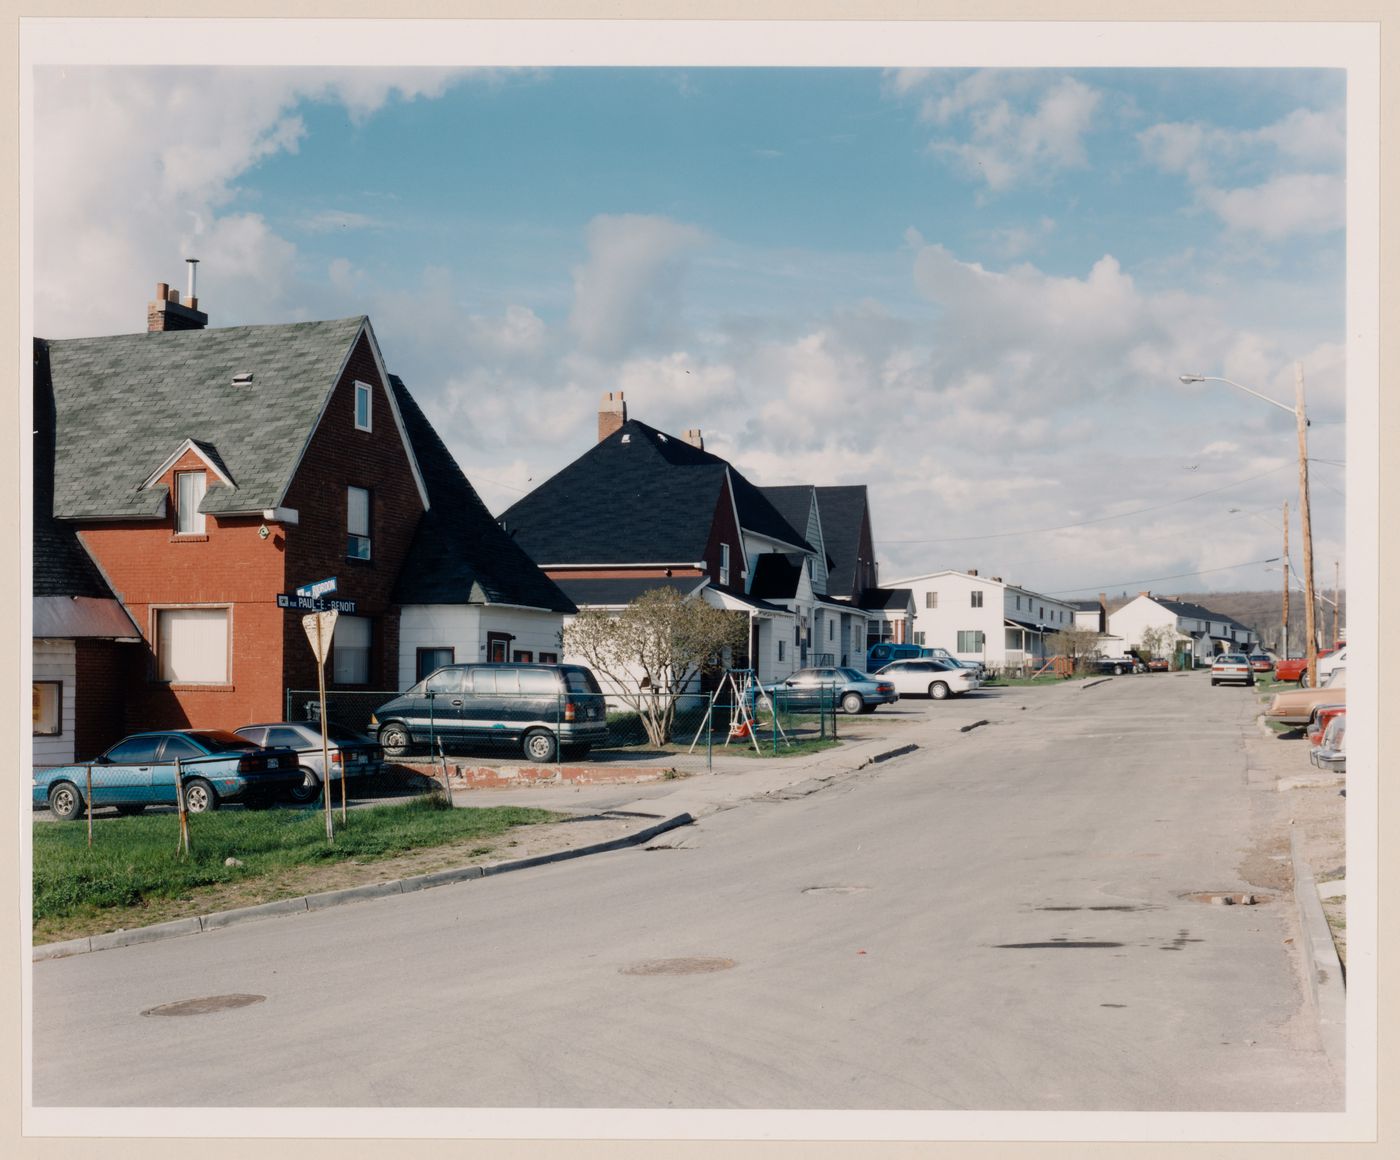 Section 2 of 2 of Panorama of workers' row housing on the corner of rue Paul E. Benoit and avenue Riordon looking south, Témiscaming, Quebec